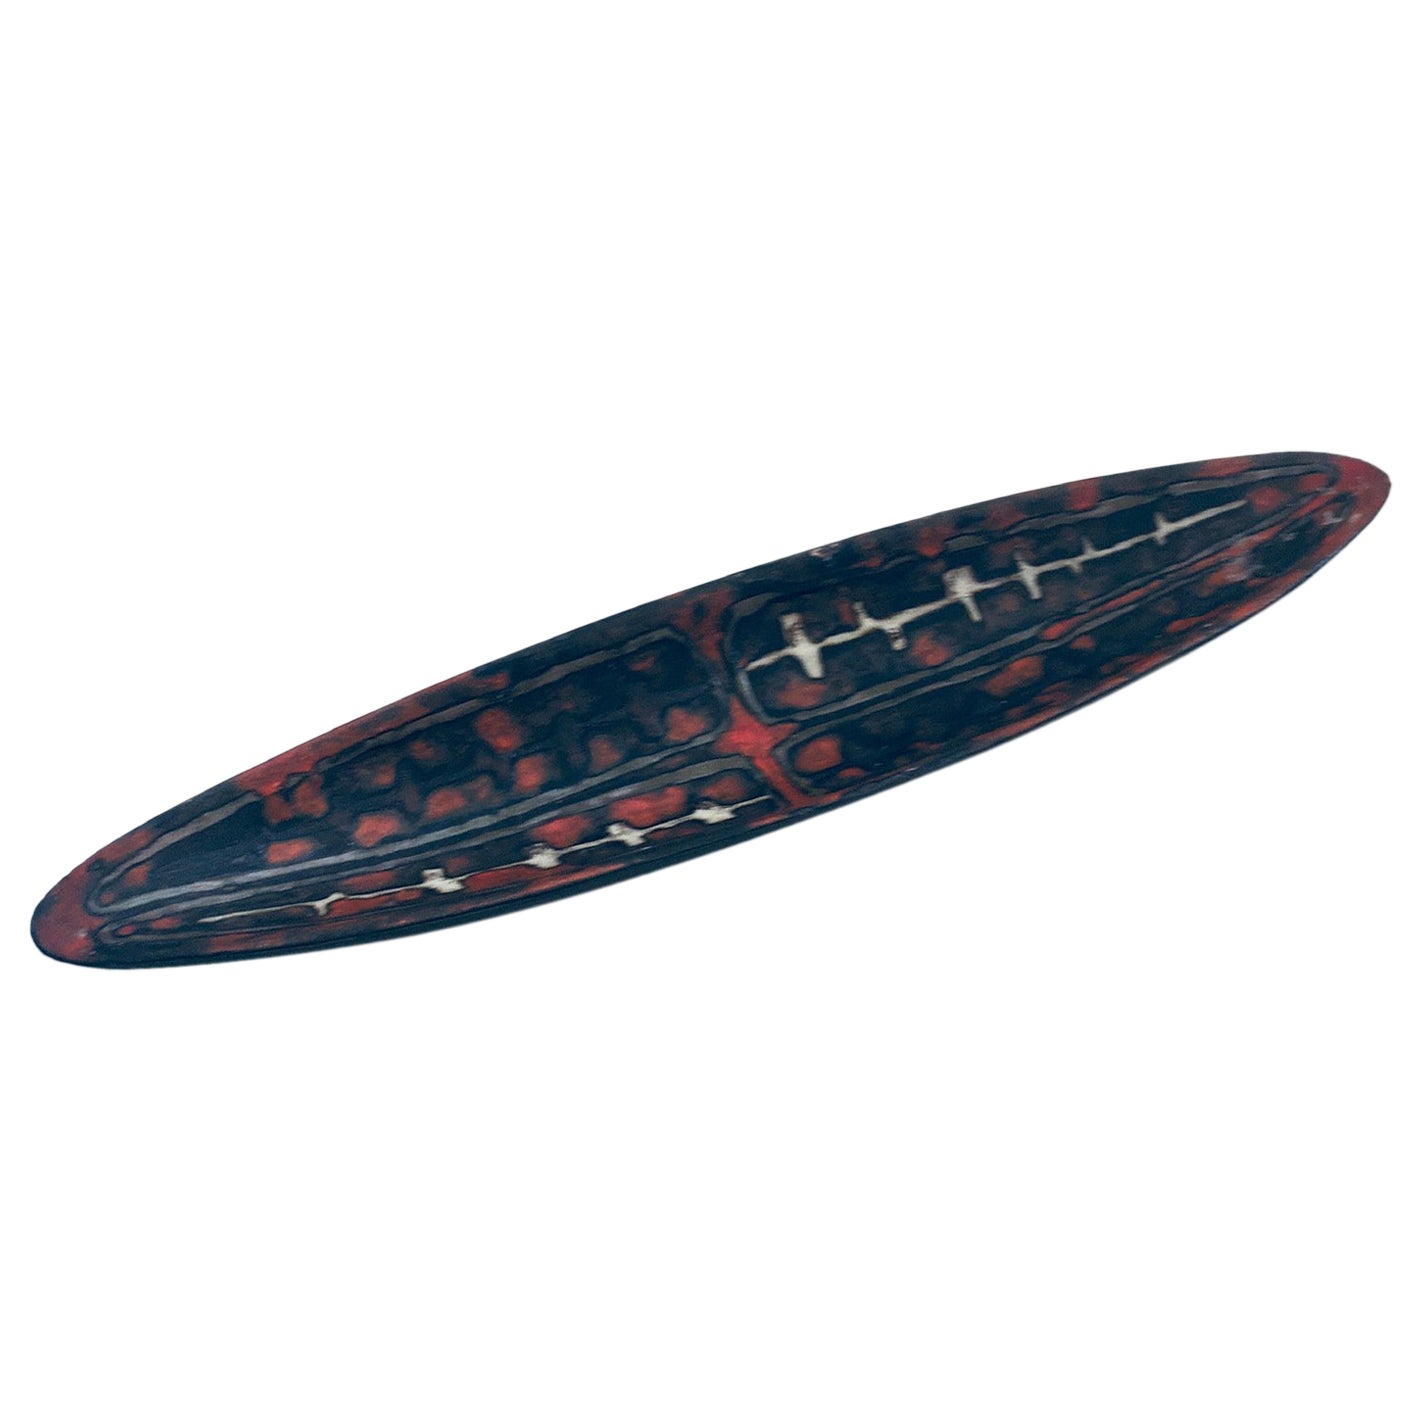 Abstract Art Ceramic Surfboard Bowl Dish by Perignem Studio, Belgium 1960's For Sale